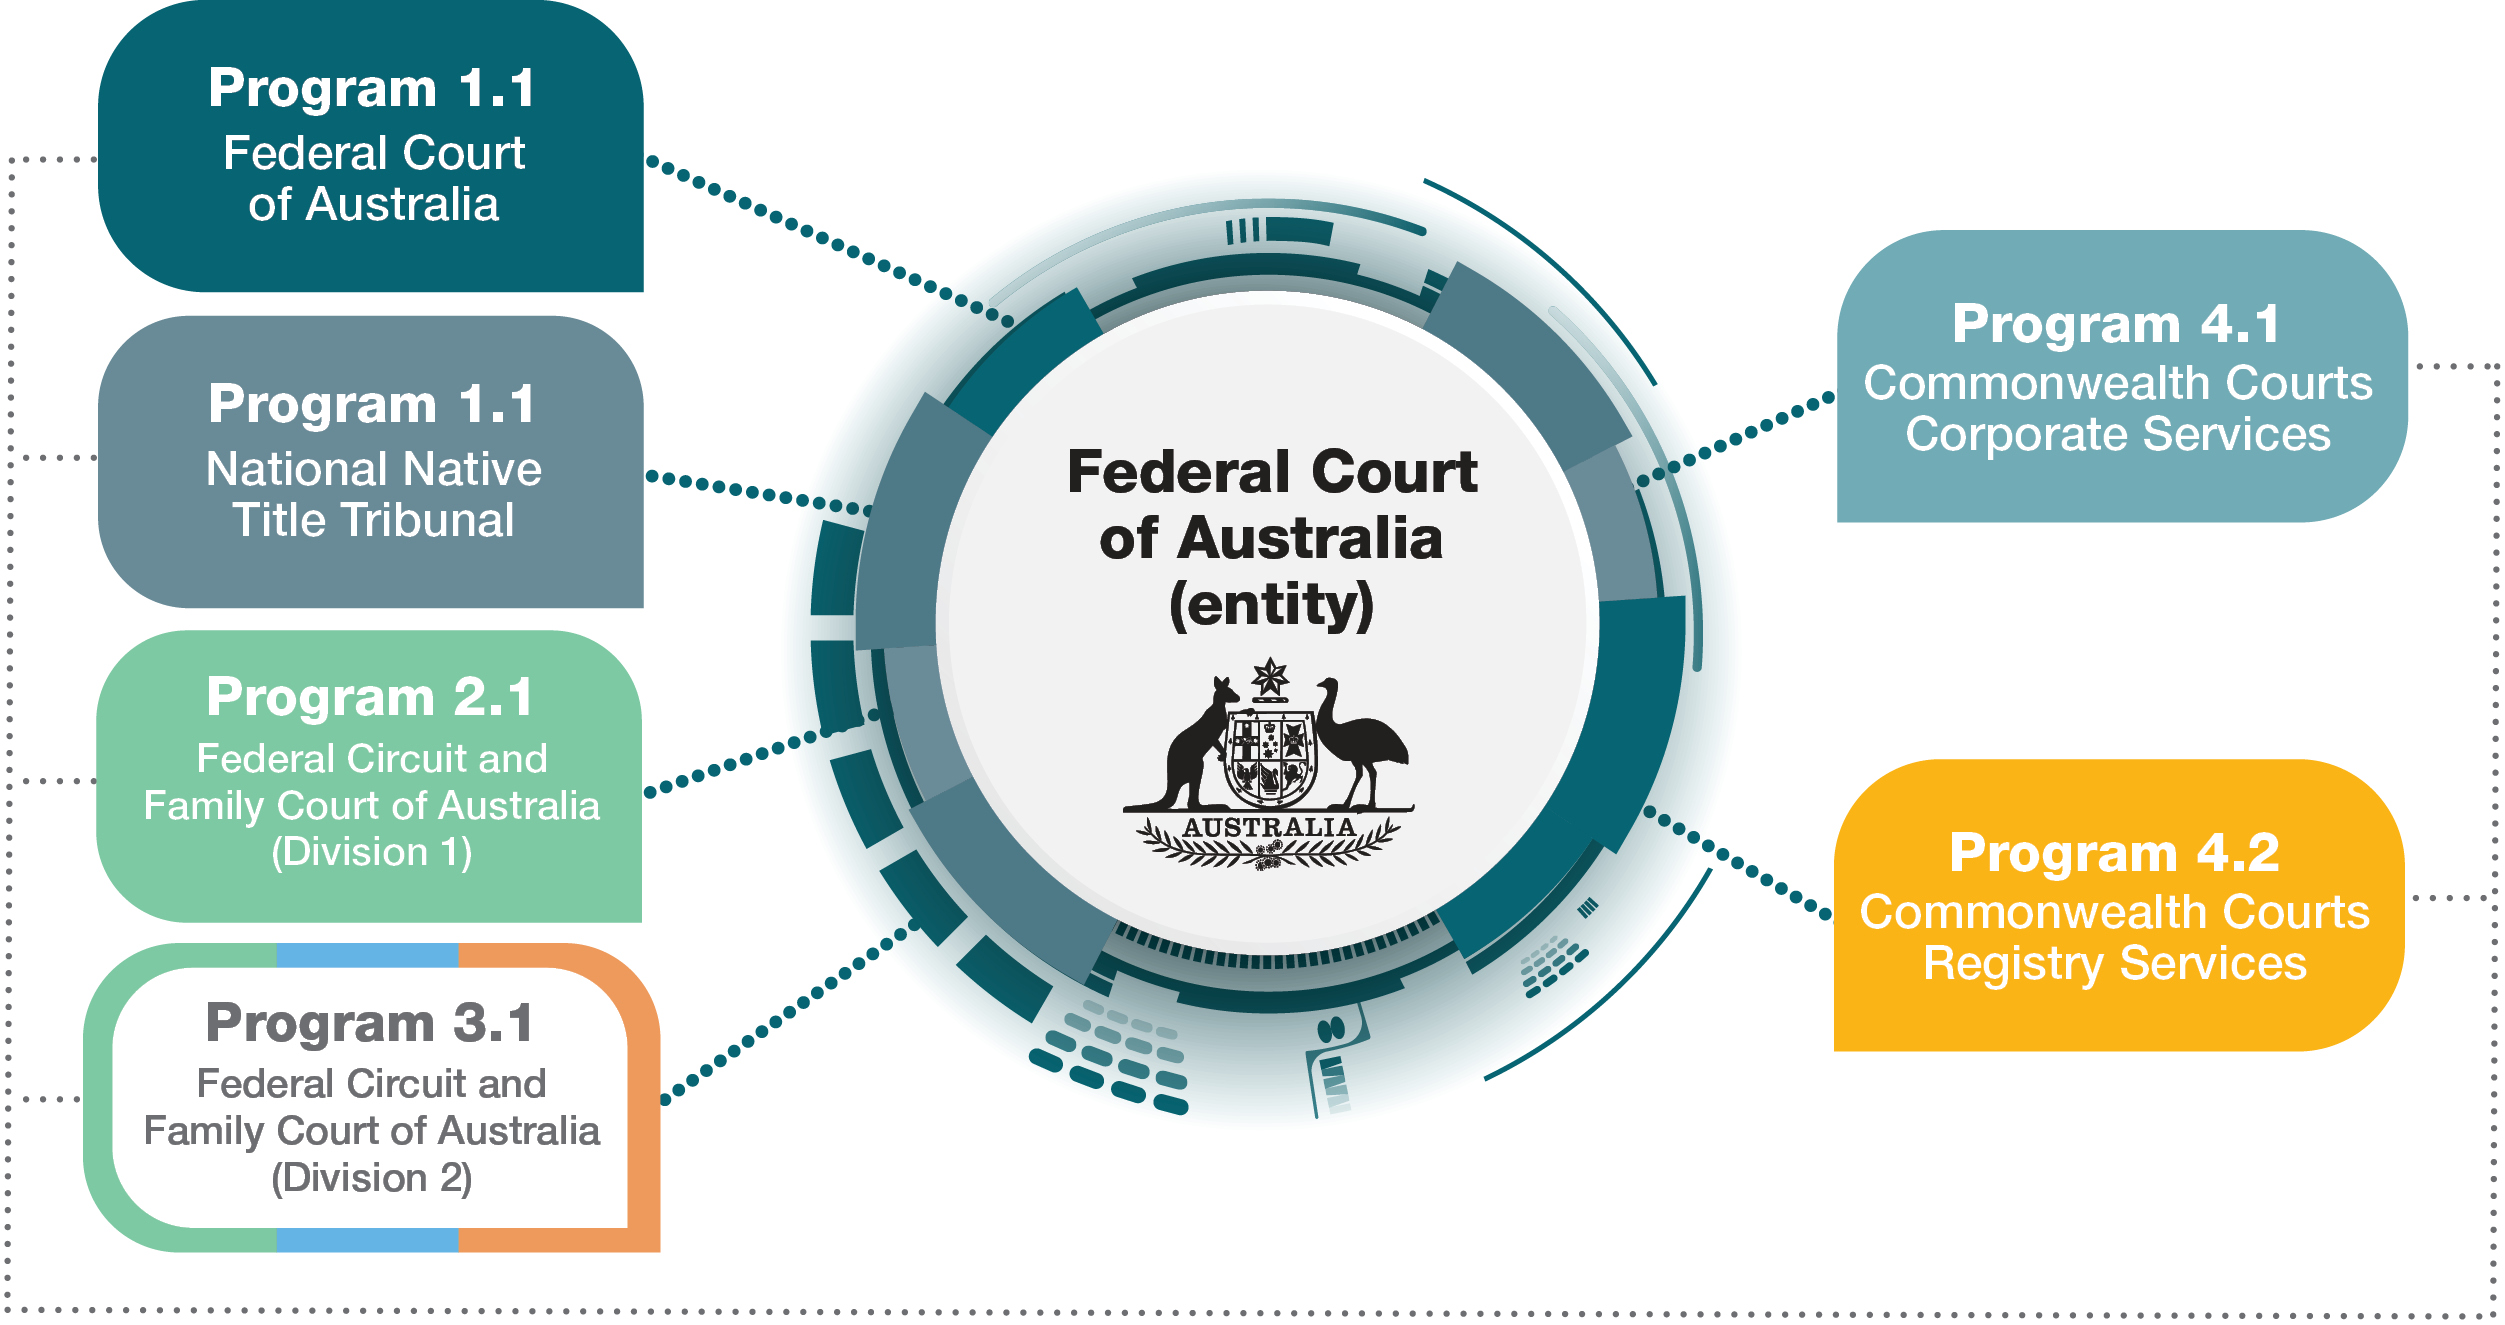 Schematic diagram of the Federal Court (as the Entity) with the various programs that it runs leading out of it. The centre circle reads "Federal Court of Australia (entity) and branches into separate sections, being 1. Program 1.1: Federal Court of Australia  Program 1.1: National Native Title Tribunal 2. Program 2.1: Federal Circuit and Family Court of Australia – Division 1 3. Program 3.1: Federal Circuit and Family Court of Australia – Division 2 4. Program 4.1: Commonwealth Courts Corporate Services  Program 4.2: Commonwealth Courts Registry Services. The first 3 programs collectively run into programs 4.1 and 4.2, as they service the previous 3 programs.